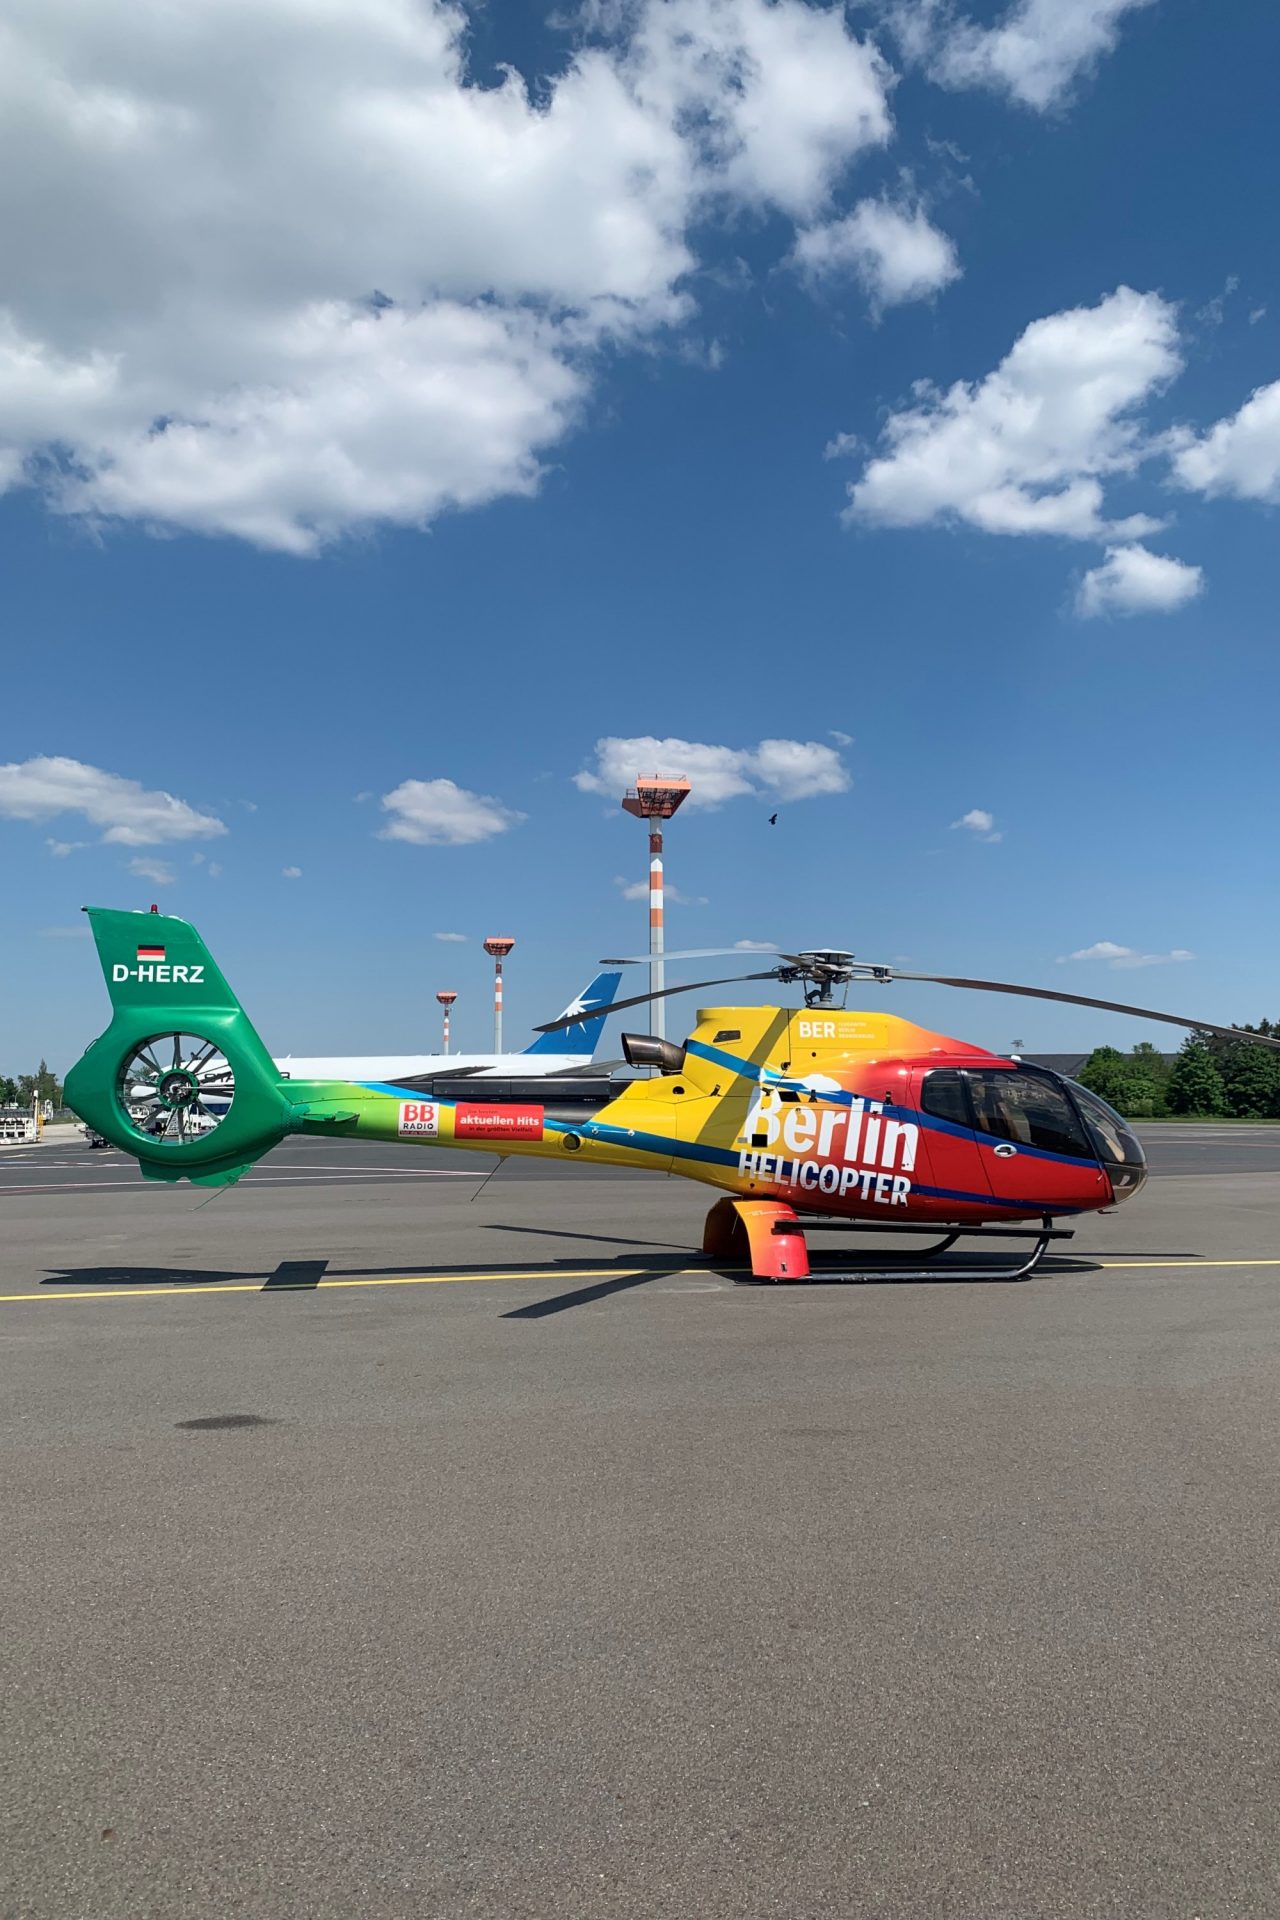 Helicopter at the BER apron